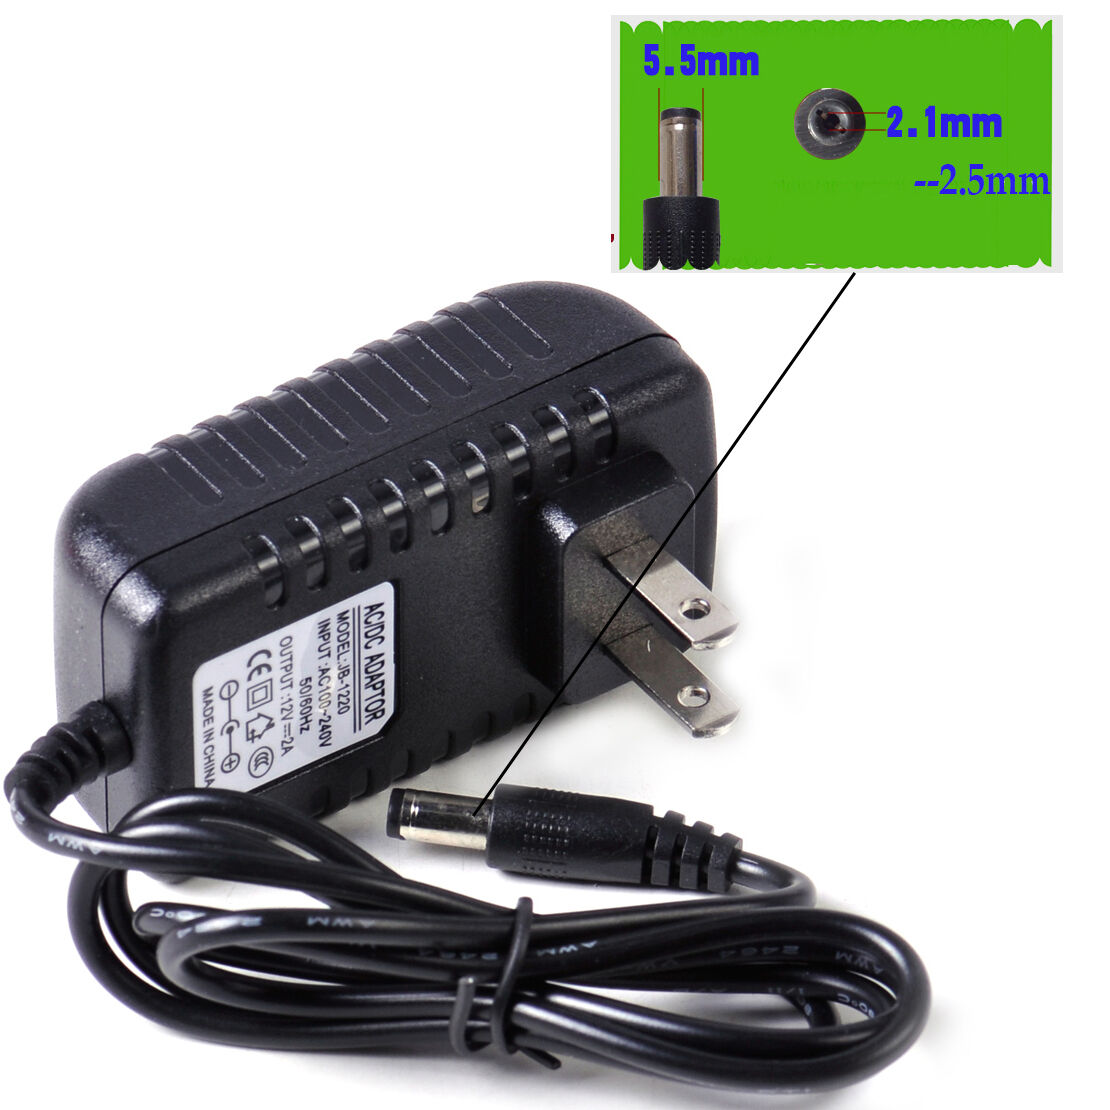 12V/2A Power Supply AC To DC Adapter US Plugs Converter For CCTV Security Camera Features: Dimmable Connec